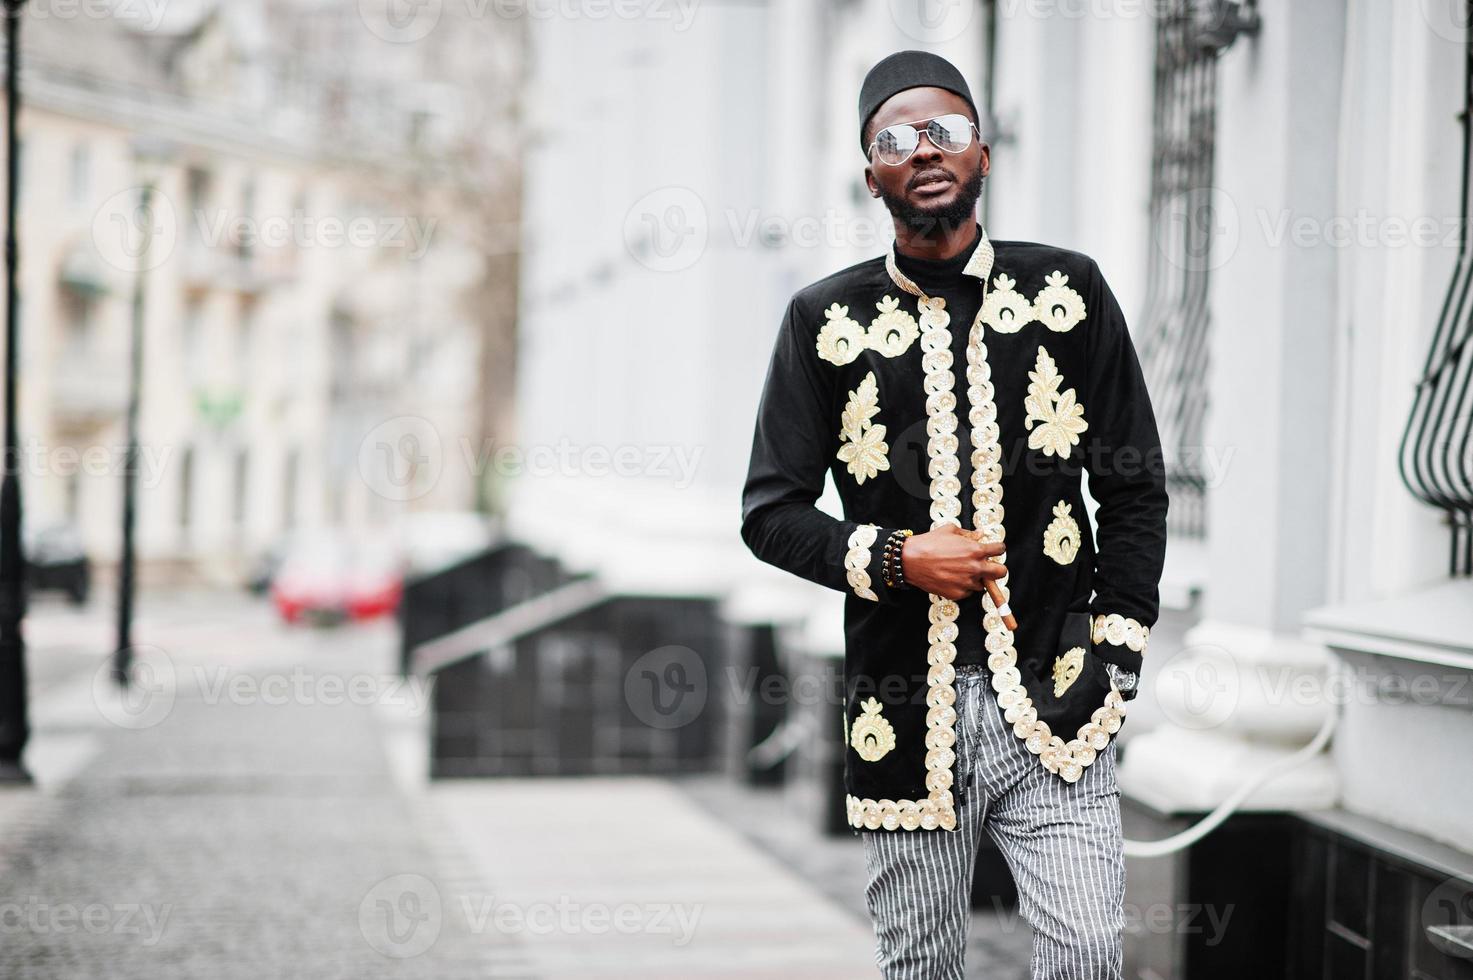 Mega stylish african man in traditional jacket pose. Fashionable black guy in hat and sunglasses with cigar in hand. photo